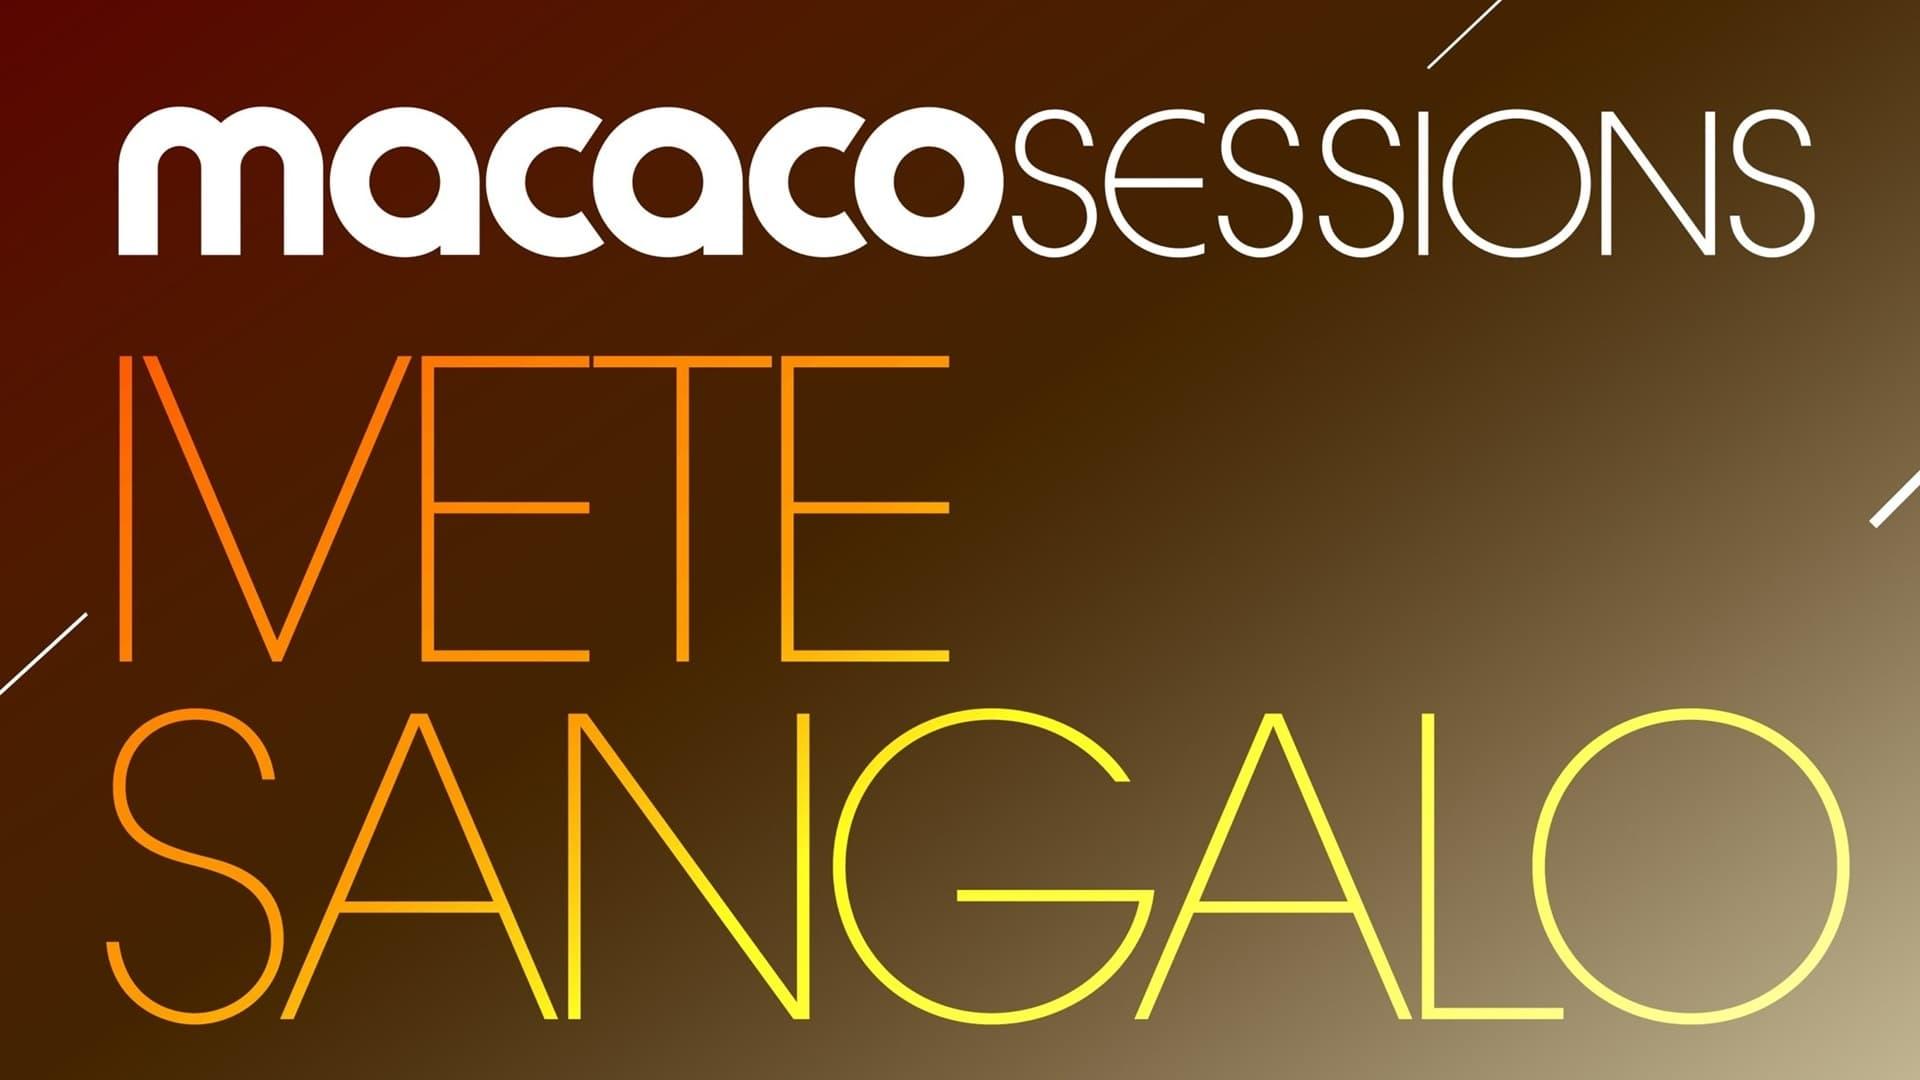 Macaco Sessions: Ivete Sangalo backdrop